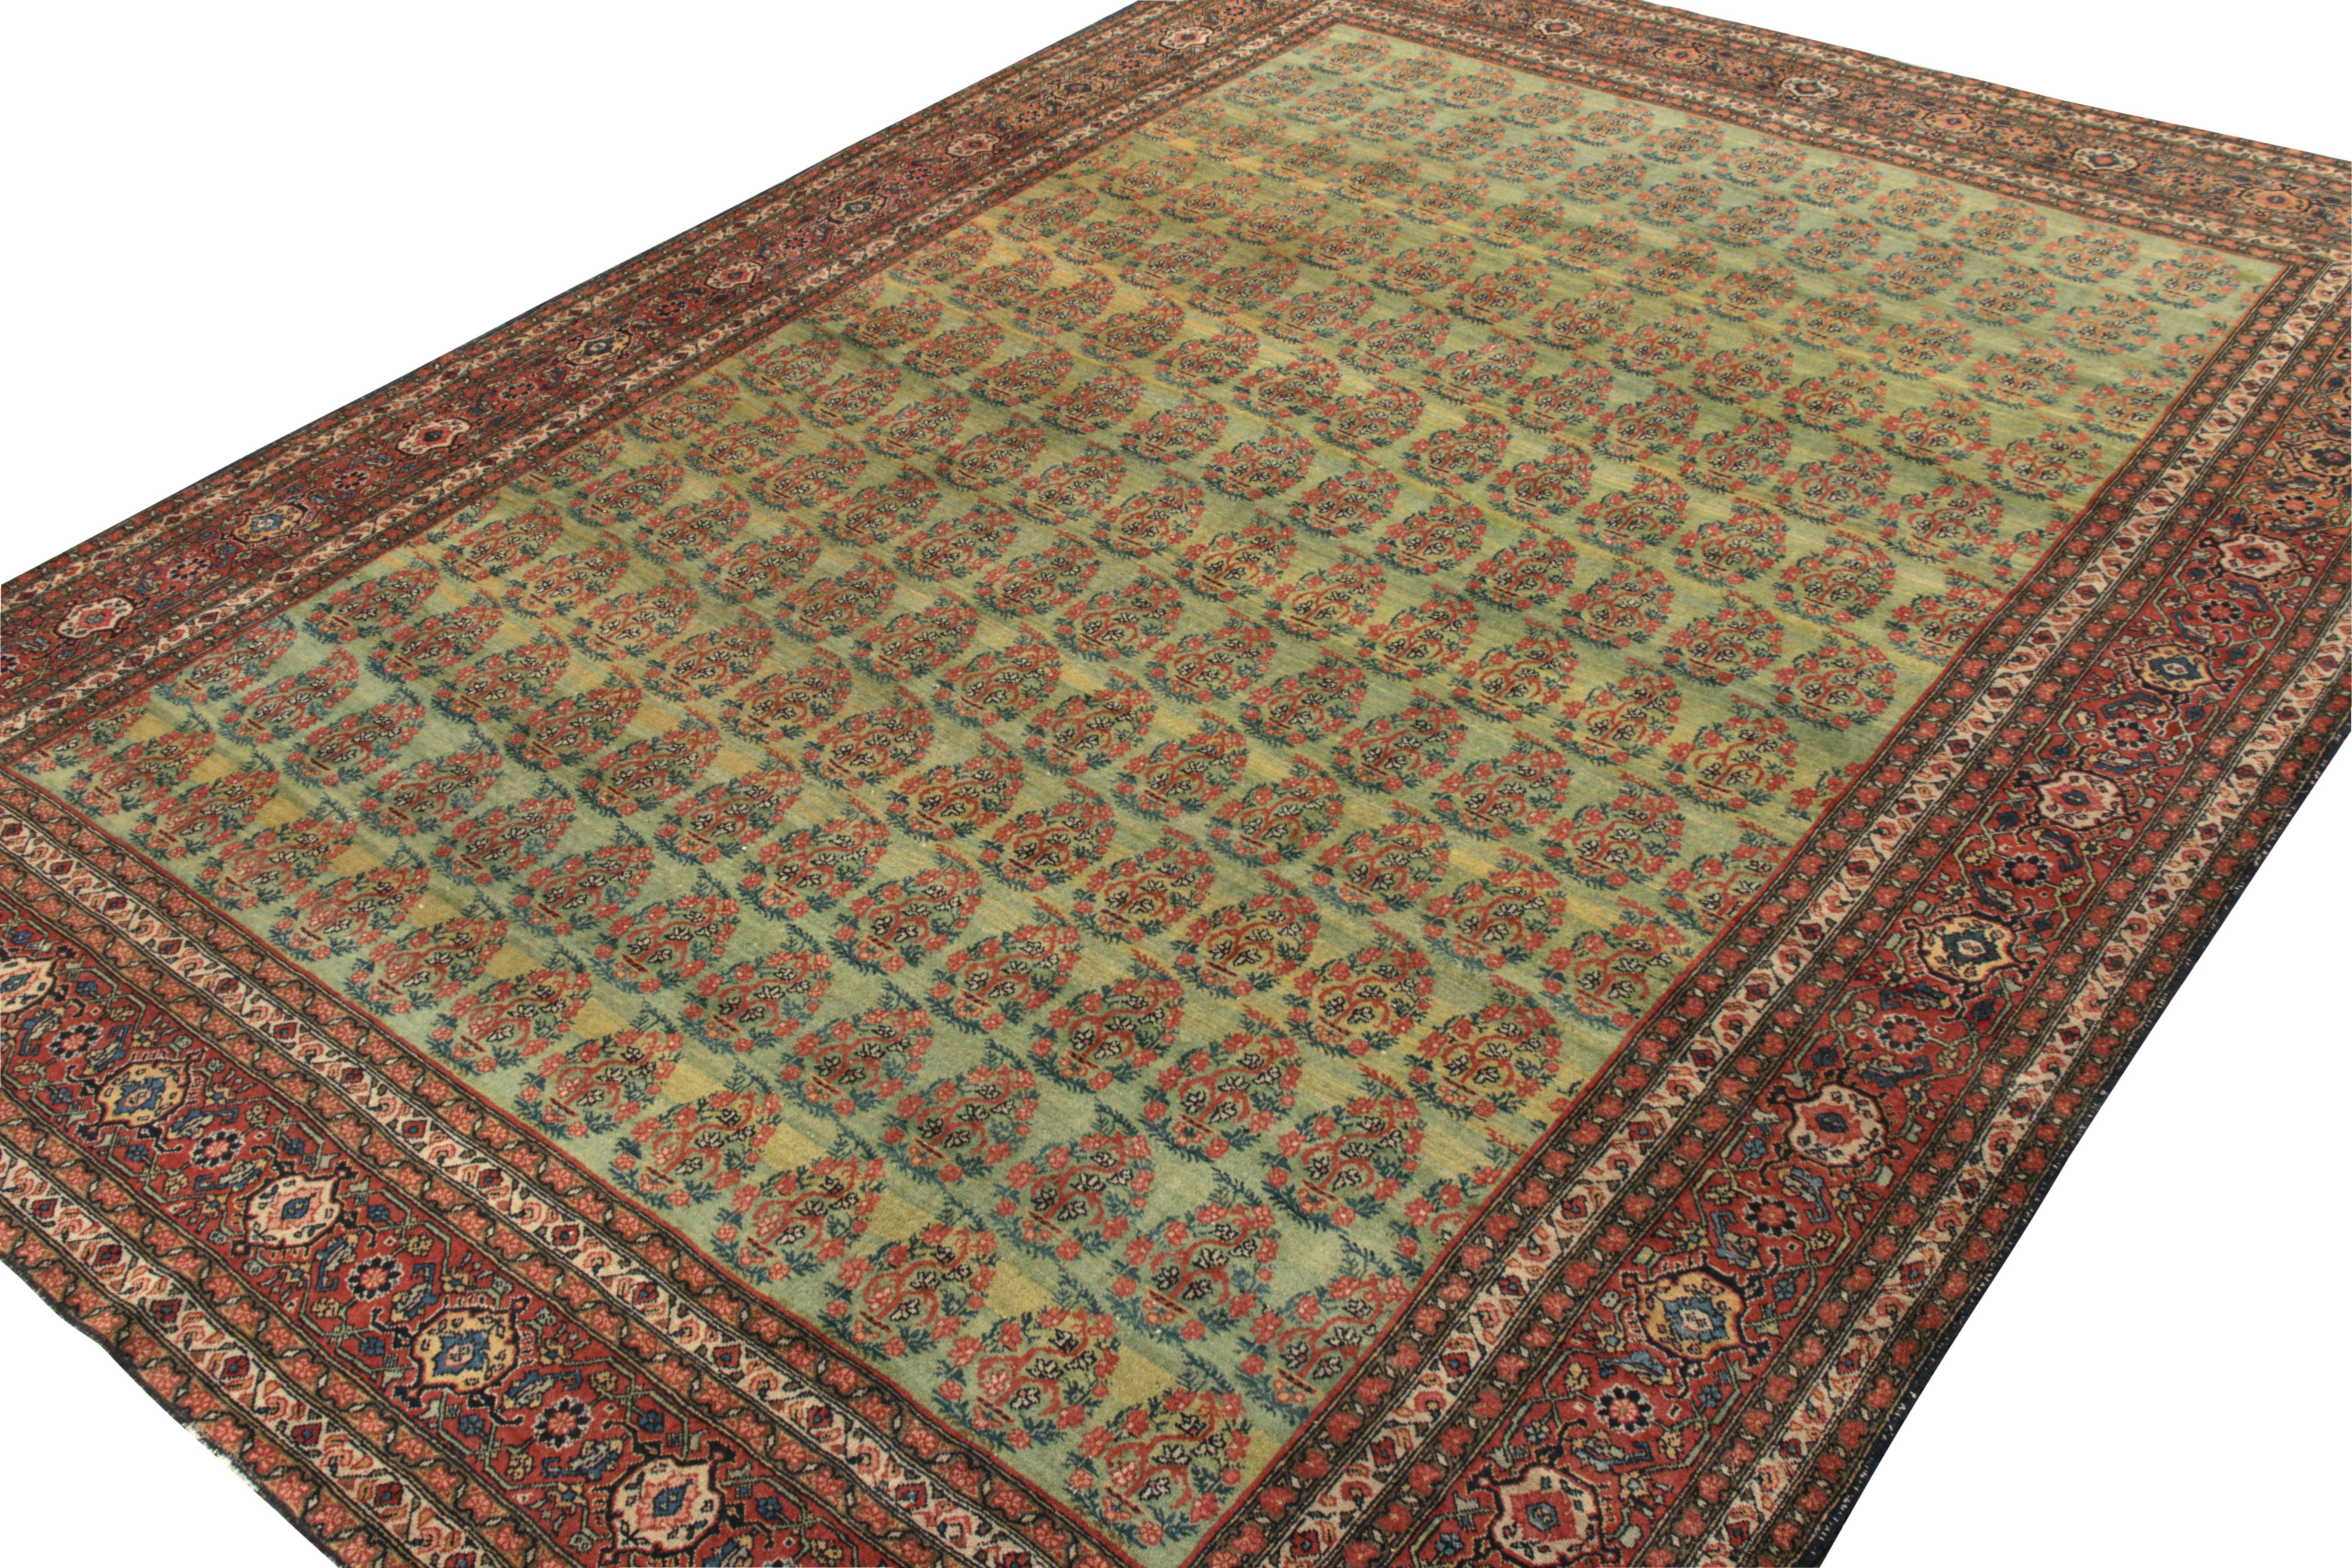 Hand-Knotted Antique Tabriz Persian Rug in an All over Green, Red Floral Pattern For Sale